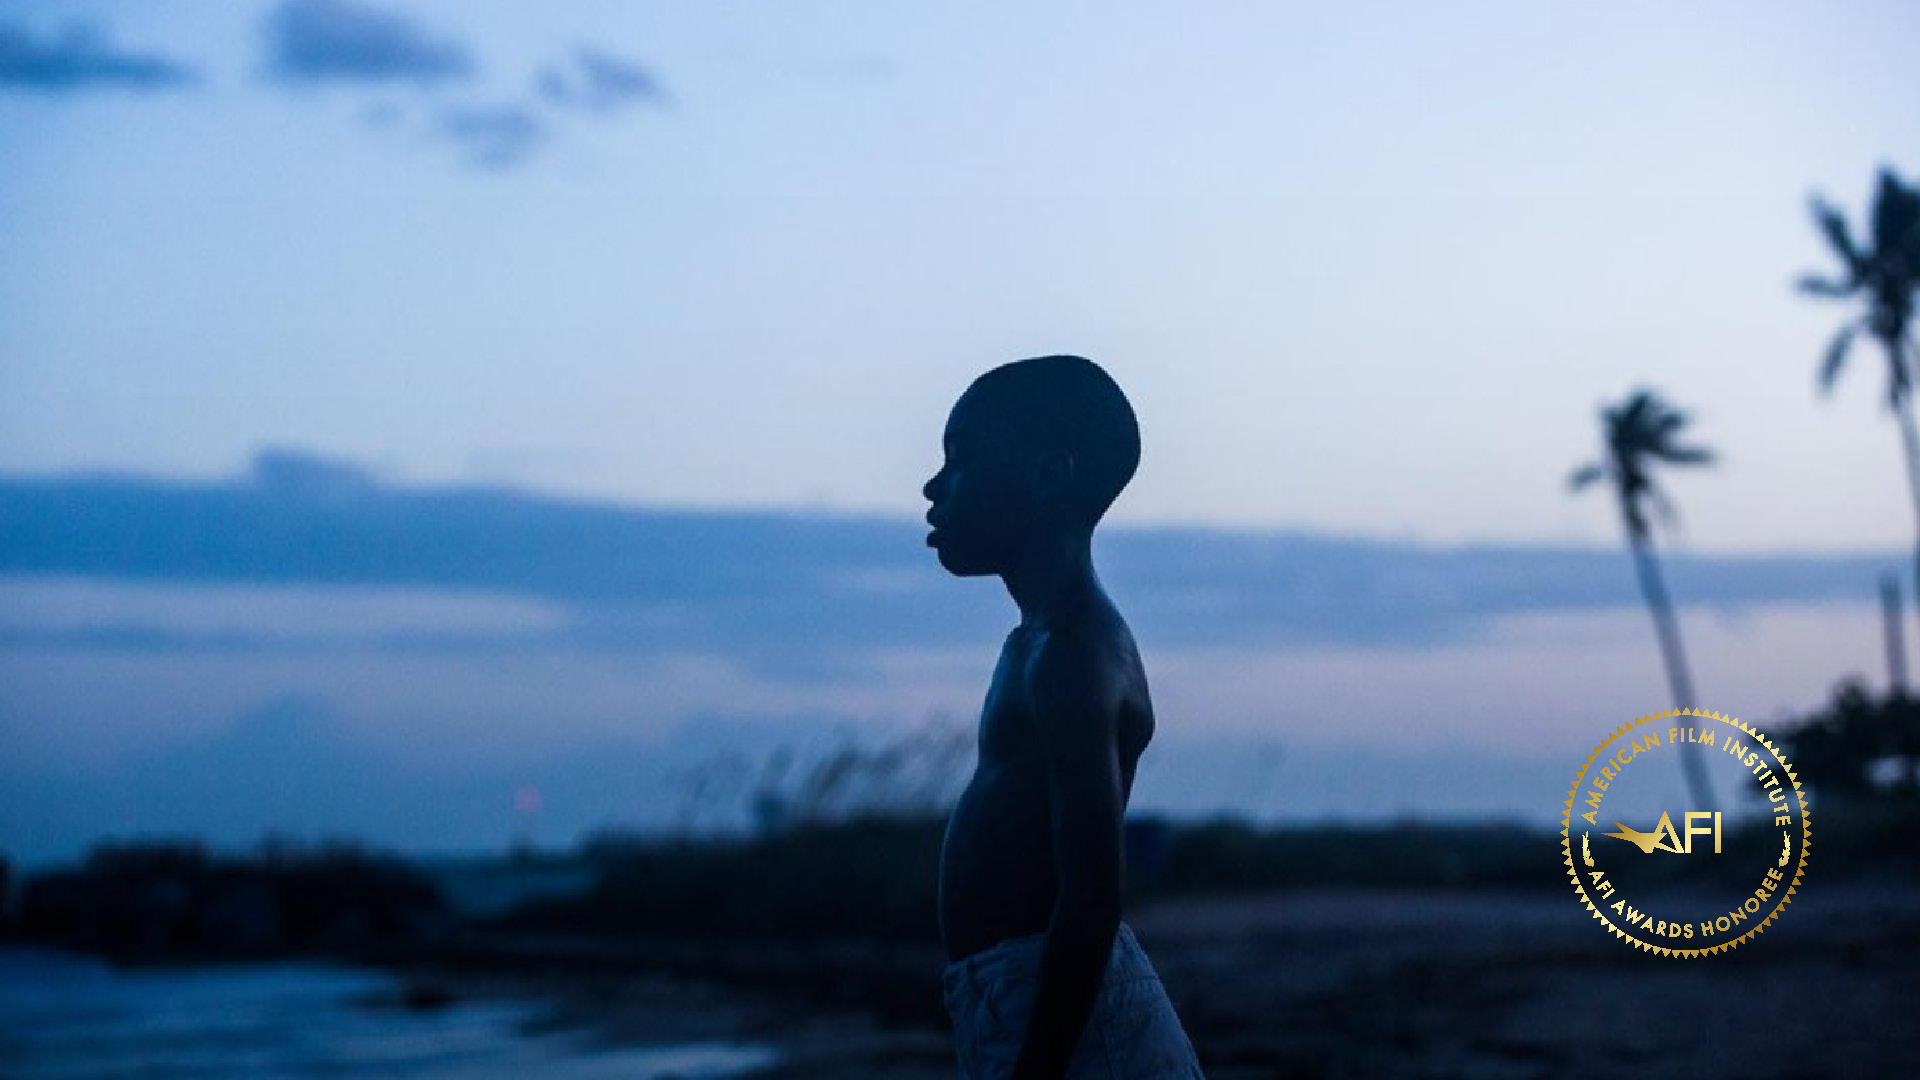 In the corner, the AFI AWARDS logo. A film still from MOONLIGHT. The main character as a young boy, CHIRON, stands on the edge of a beach and looks into the water. He is in profile silhouette against the sky.